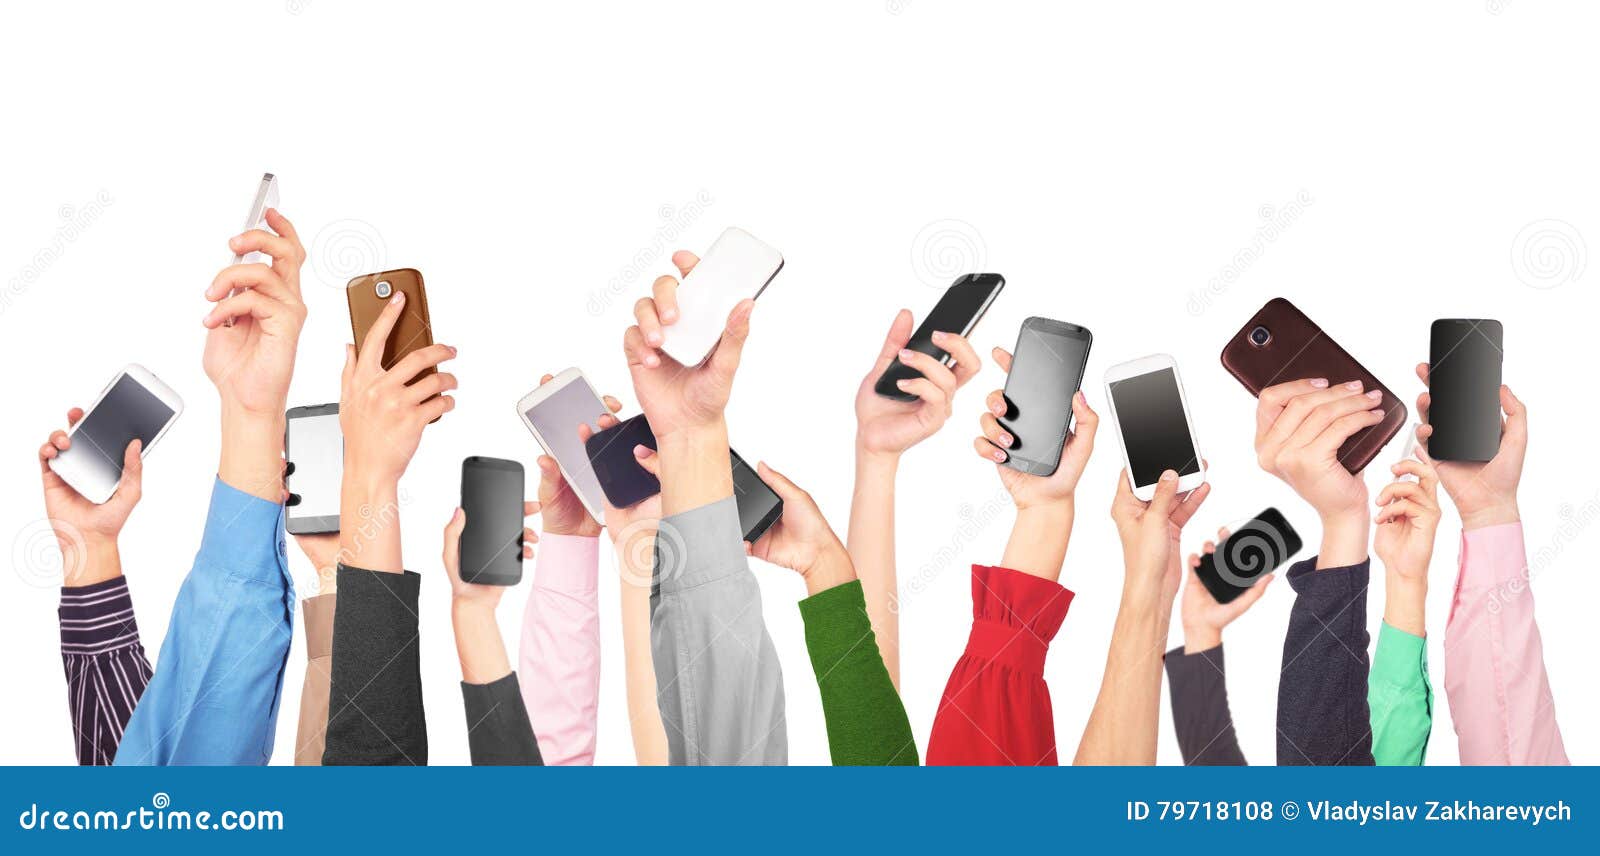 many hands holding mobile phones